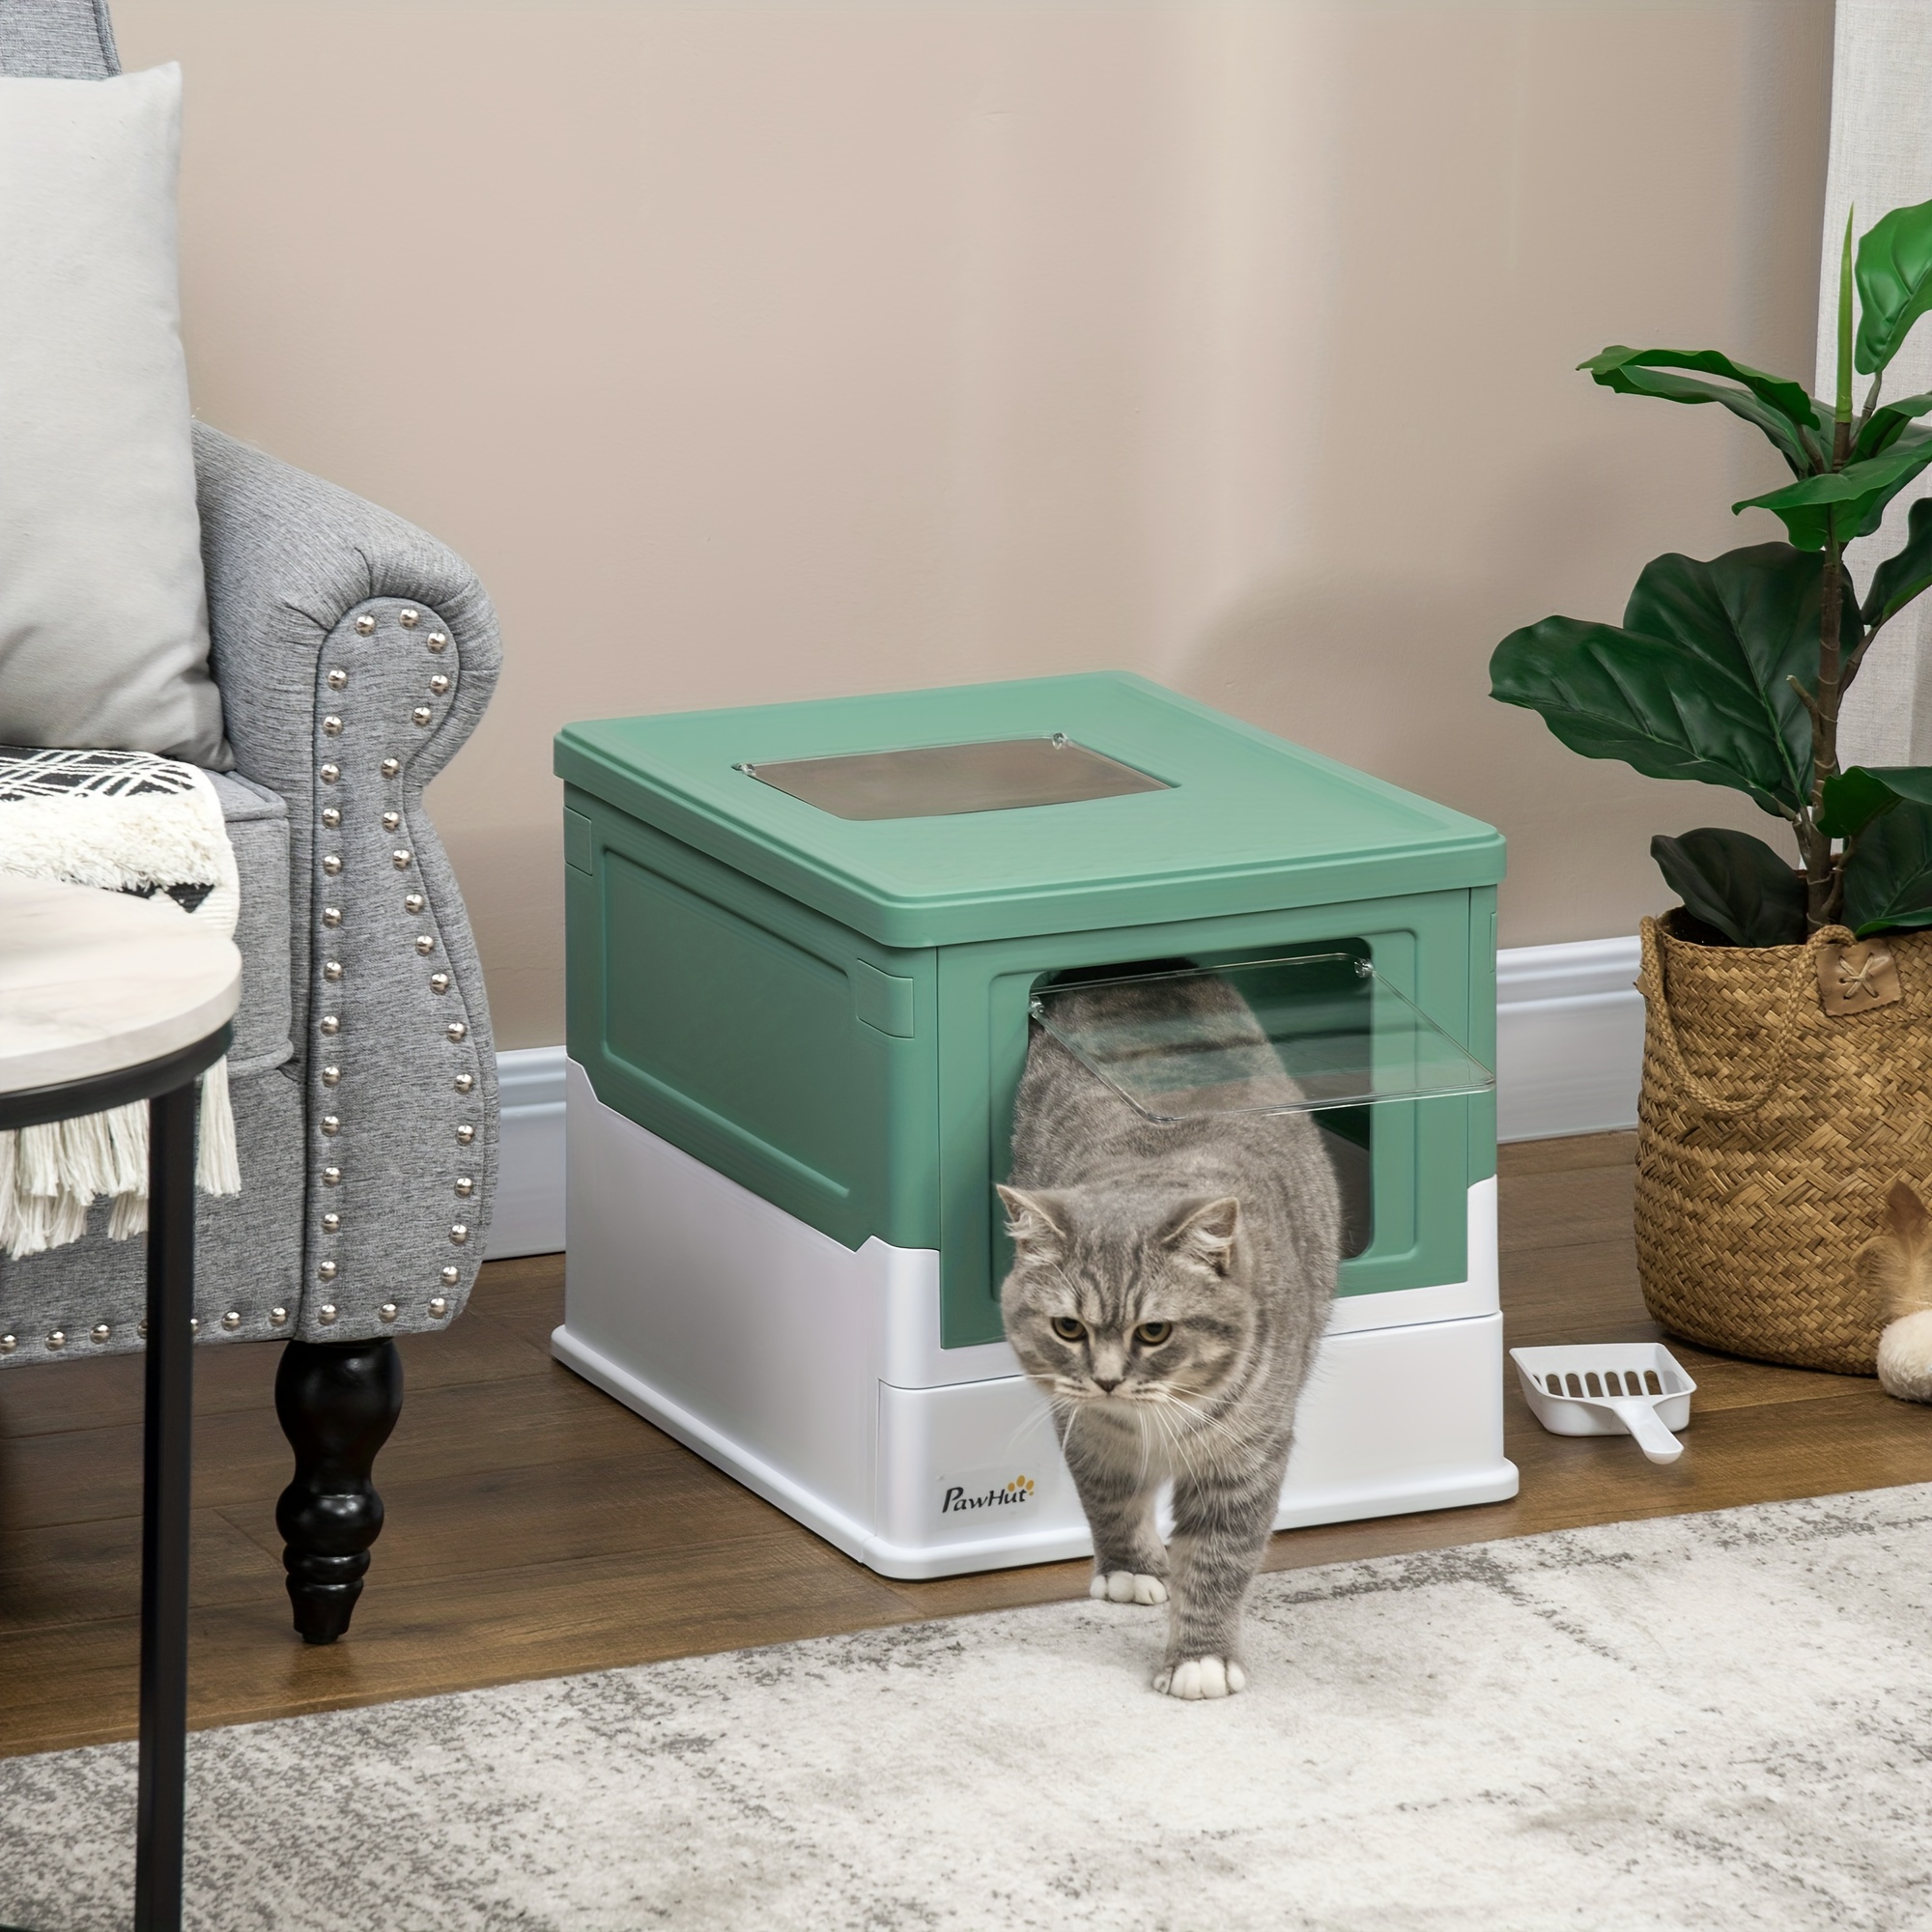 

Pawhut Fully Enclosed Cat Litter Box With Scoop, Hooded Cat Litter House With Drawer Type Tray, Foldable Smell Proof Cat Potty With Front Entry, Top Exit, Portable Pet Toilet With Large Space